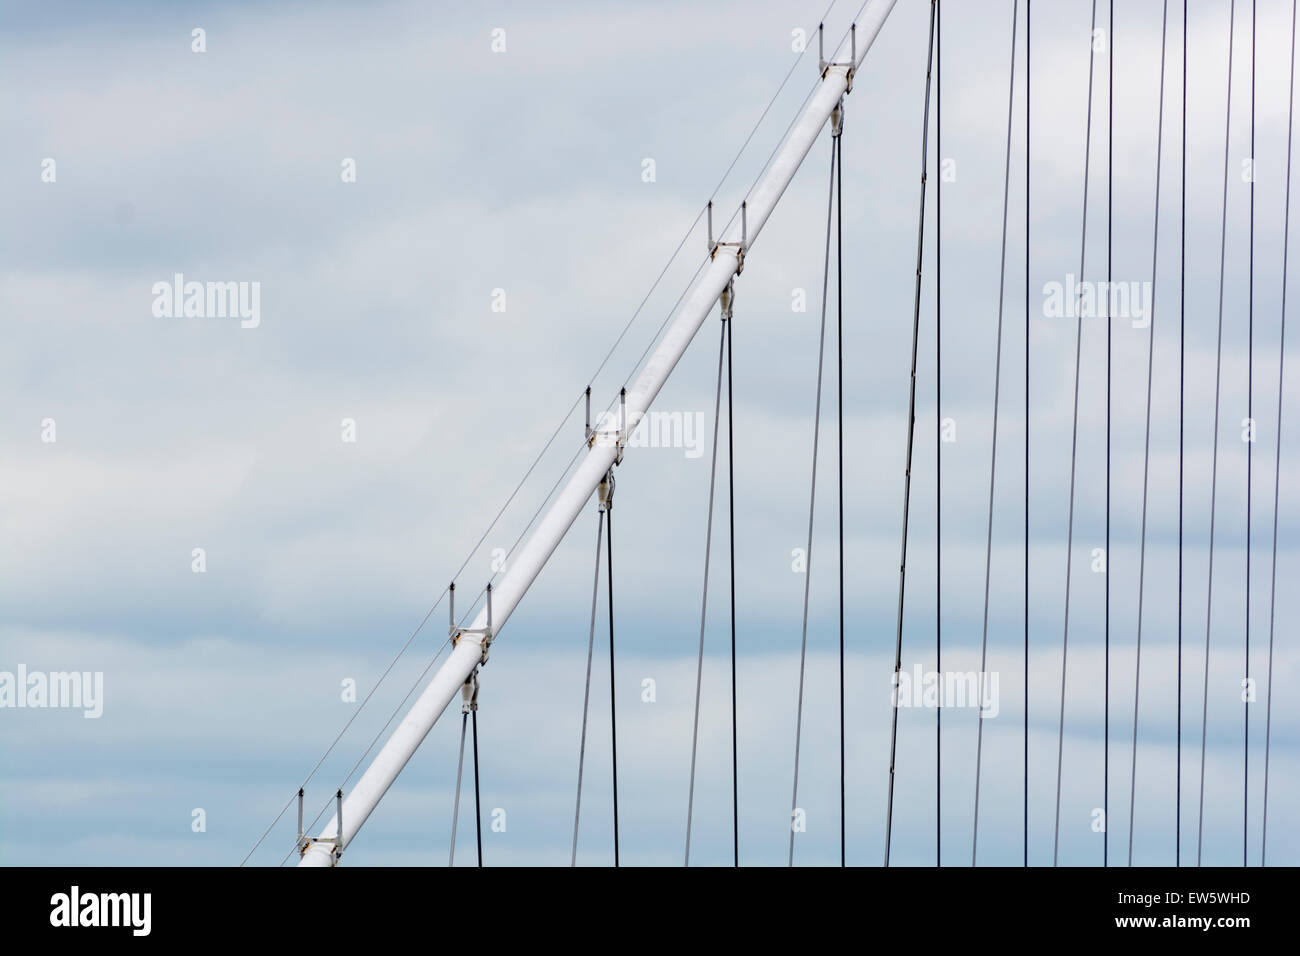 Cables on the Severn Bridge - opened to motorway traffic in 1966 connecting England and Wales across the River Severn. Stock Photo